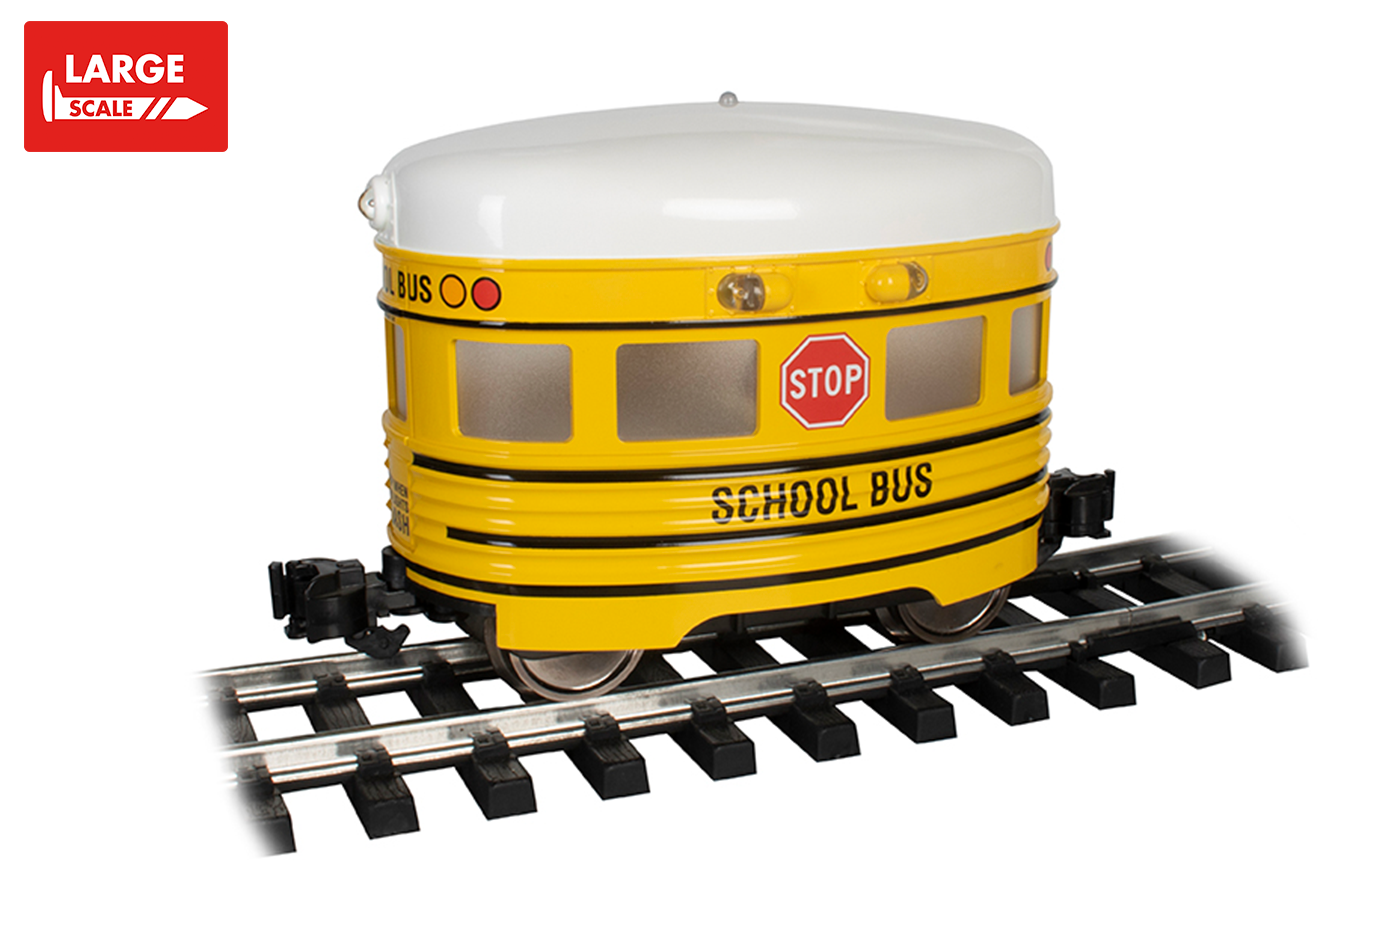 Eggliner - School Bus (With Flashing Roof Light) (Large Scale)